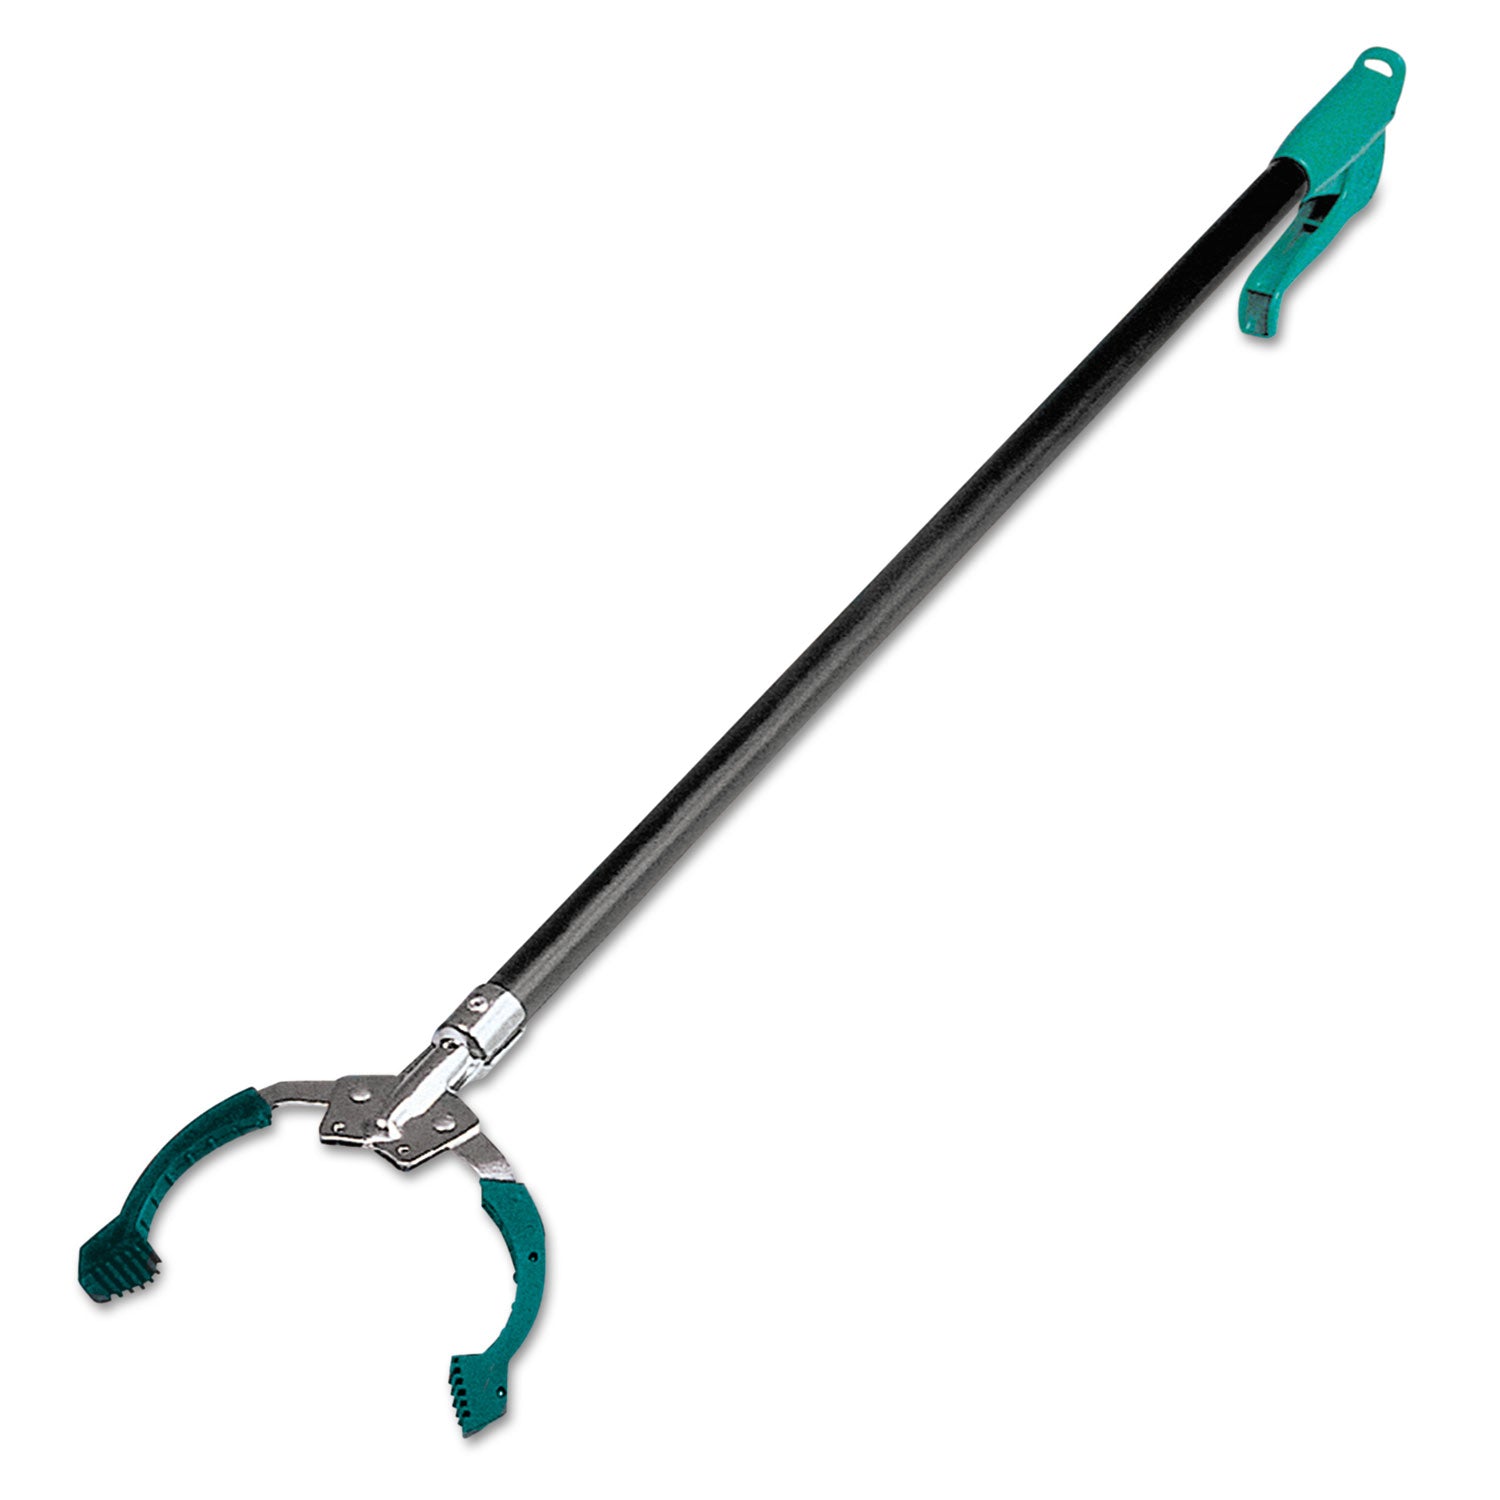 Nifty Nabber Extension Arm with Claw, 18", Black/Green - 